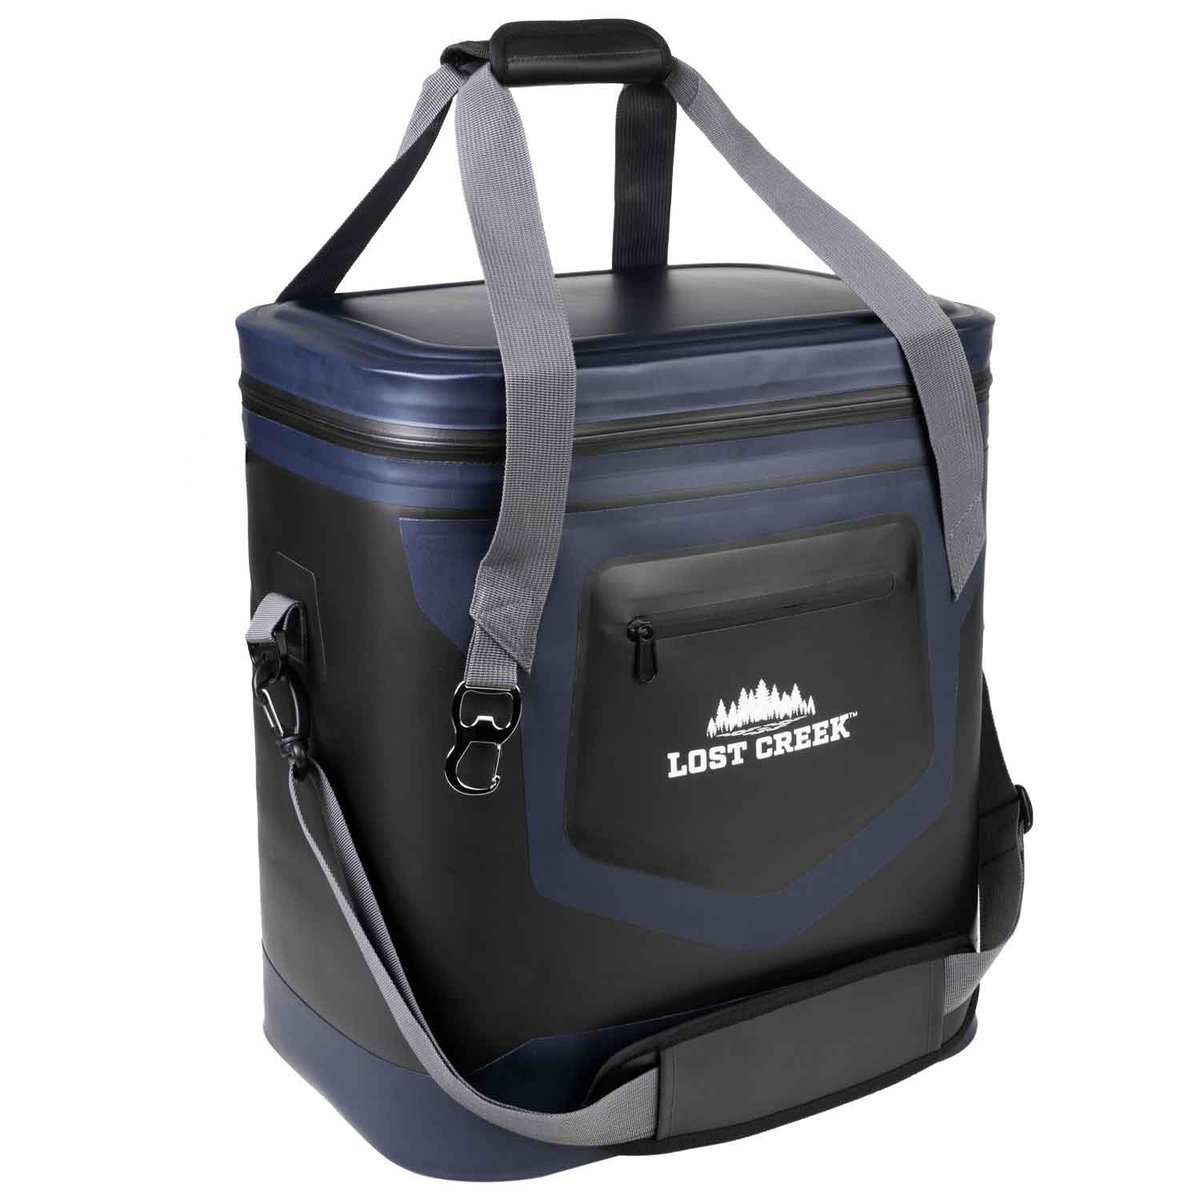 Lost Creek 36 Can Soft Cooler - Blue by Sportsman's Warehouse